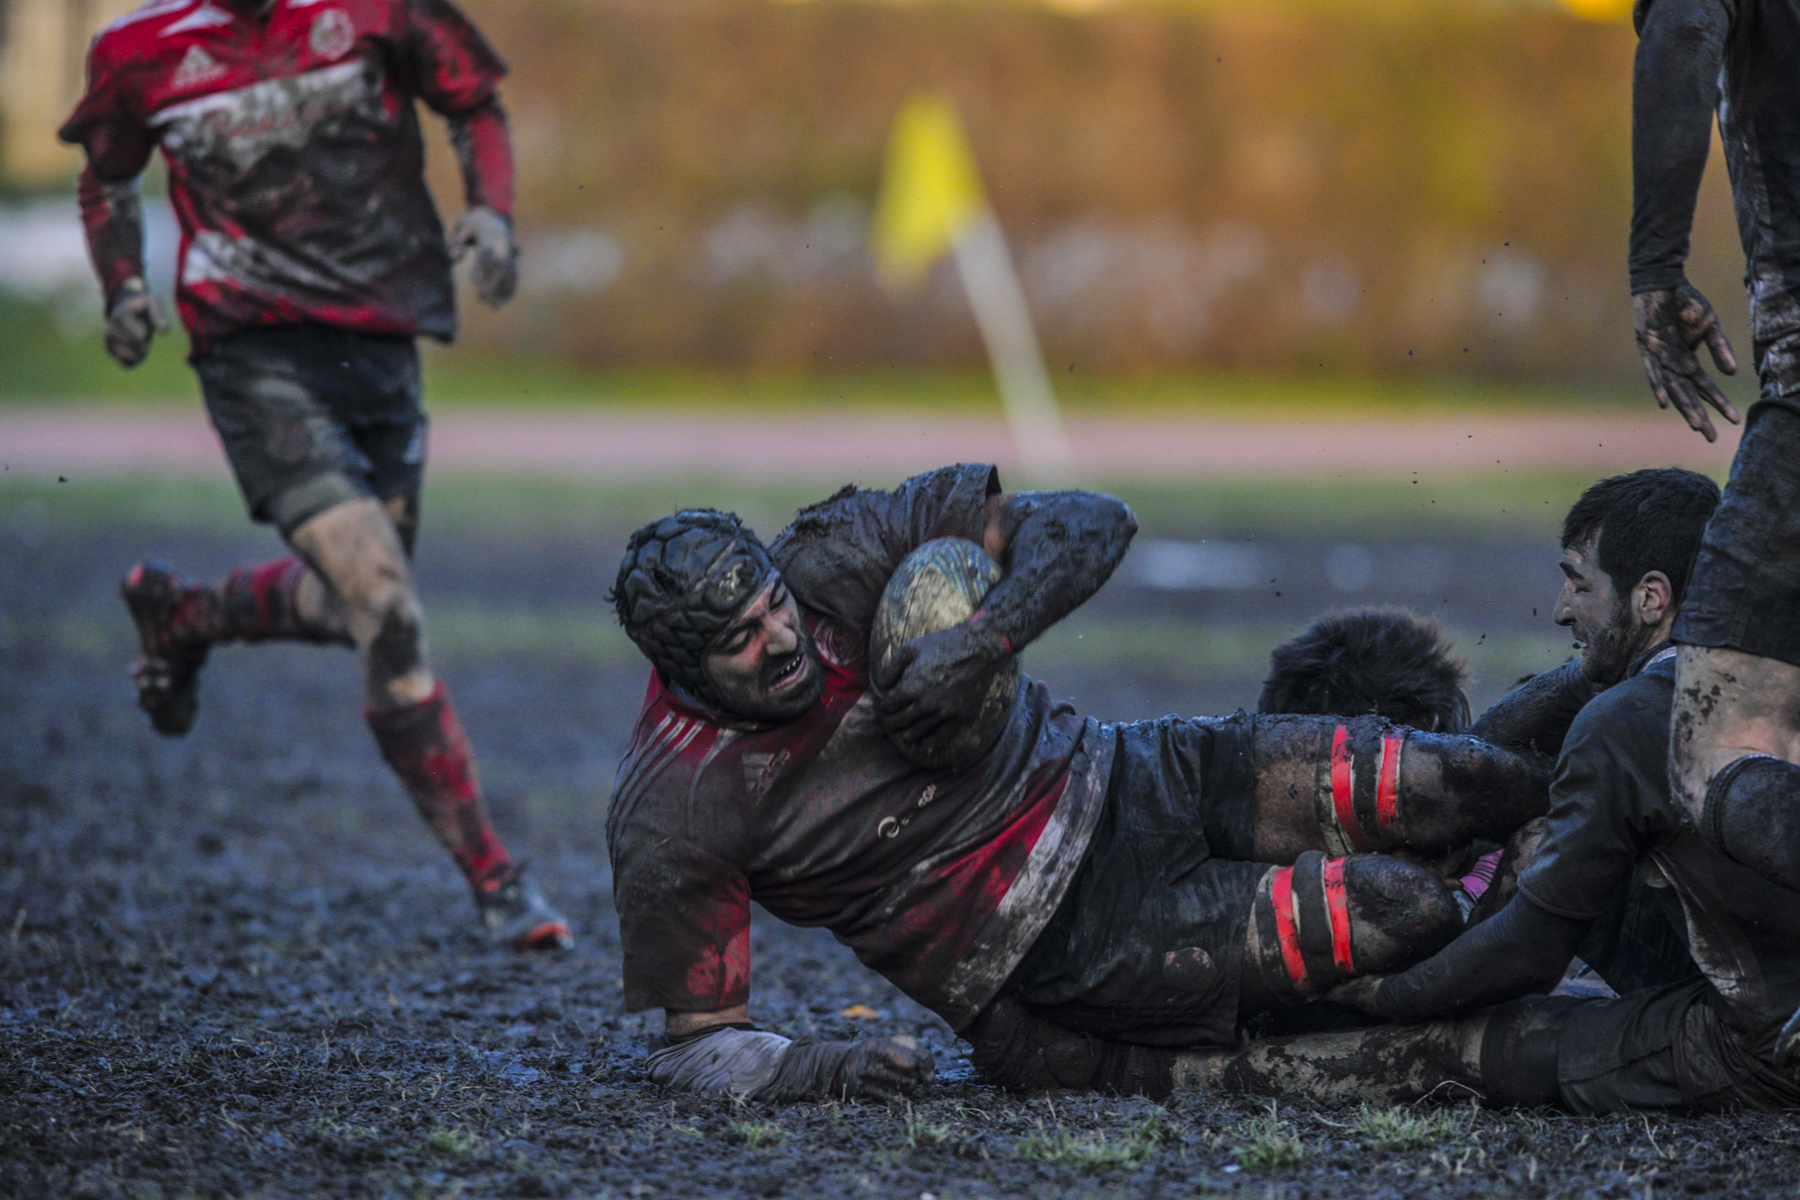 How extreme weather conditions can affect a rugby match